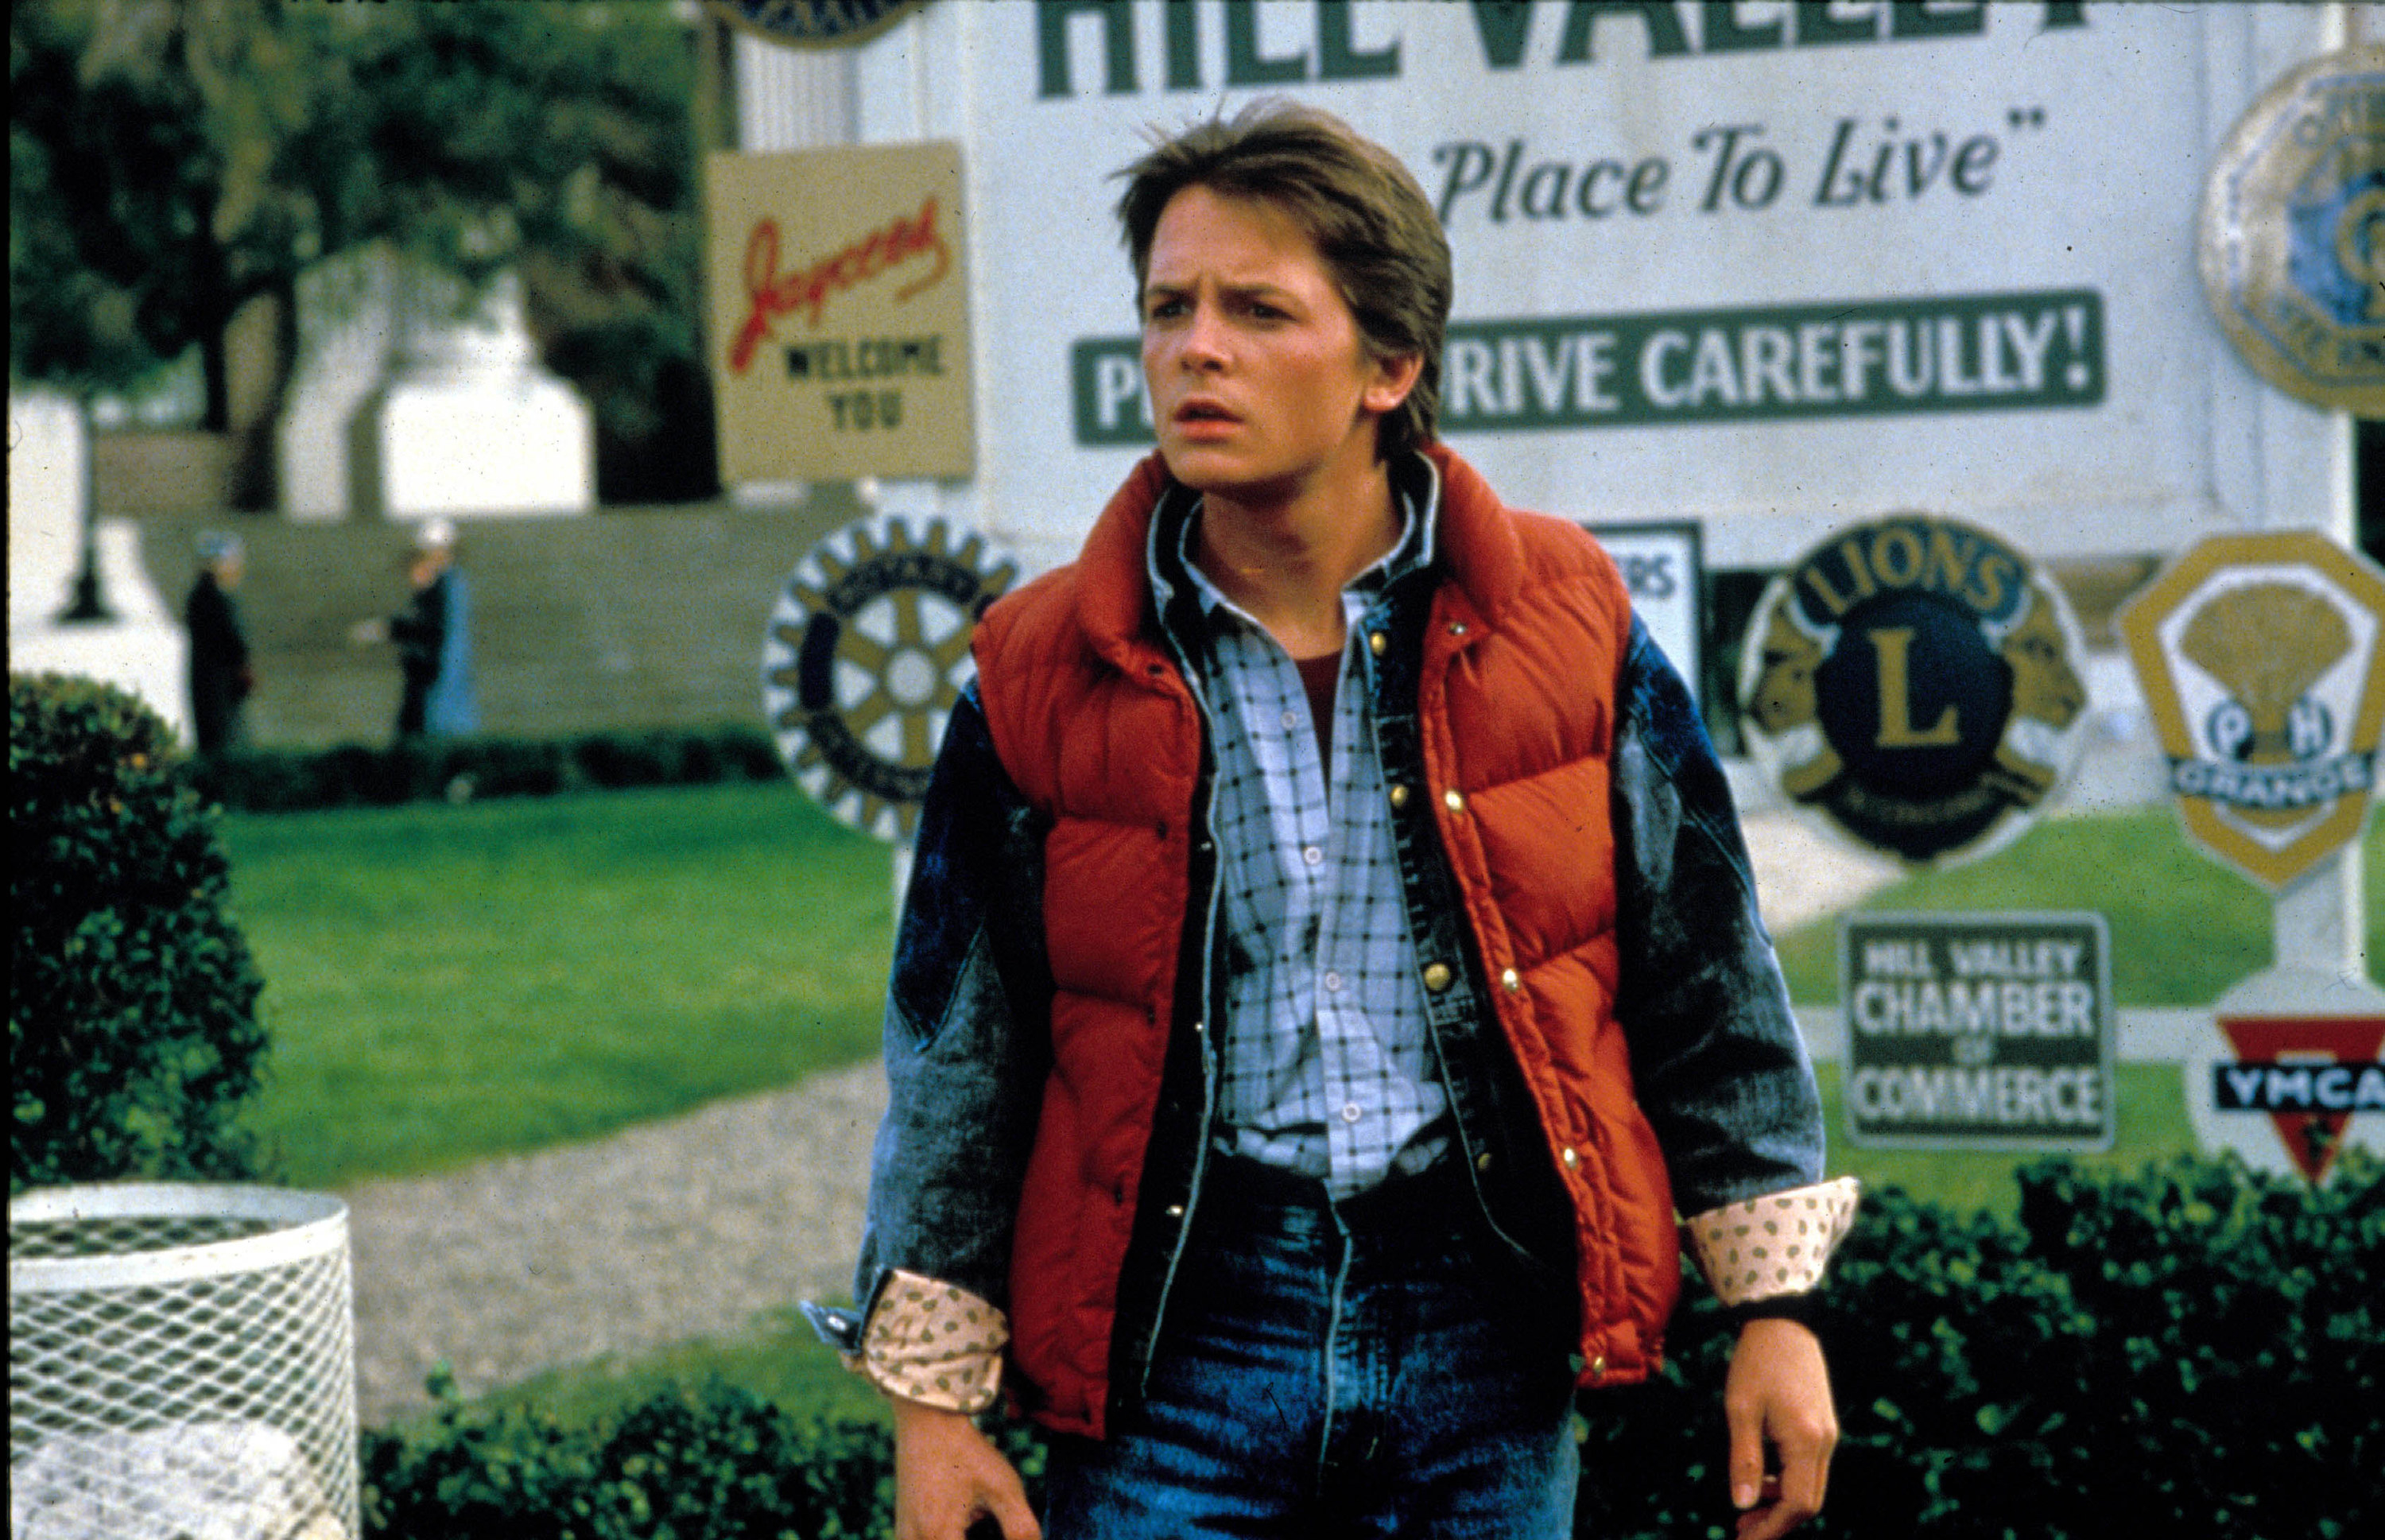 Michael J. Fox stands in a puffy jacket and all-denim wardrobe, staring at something confusing near a park